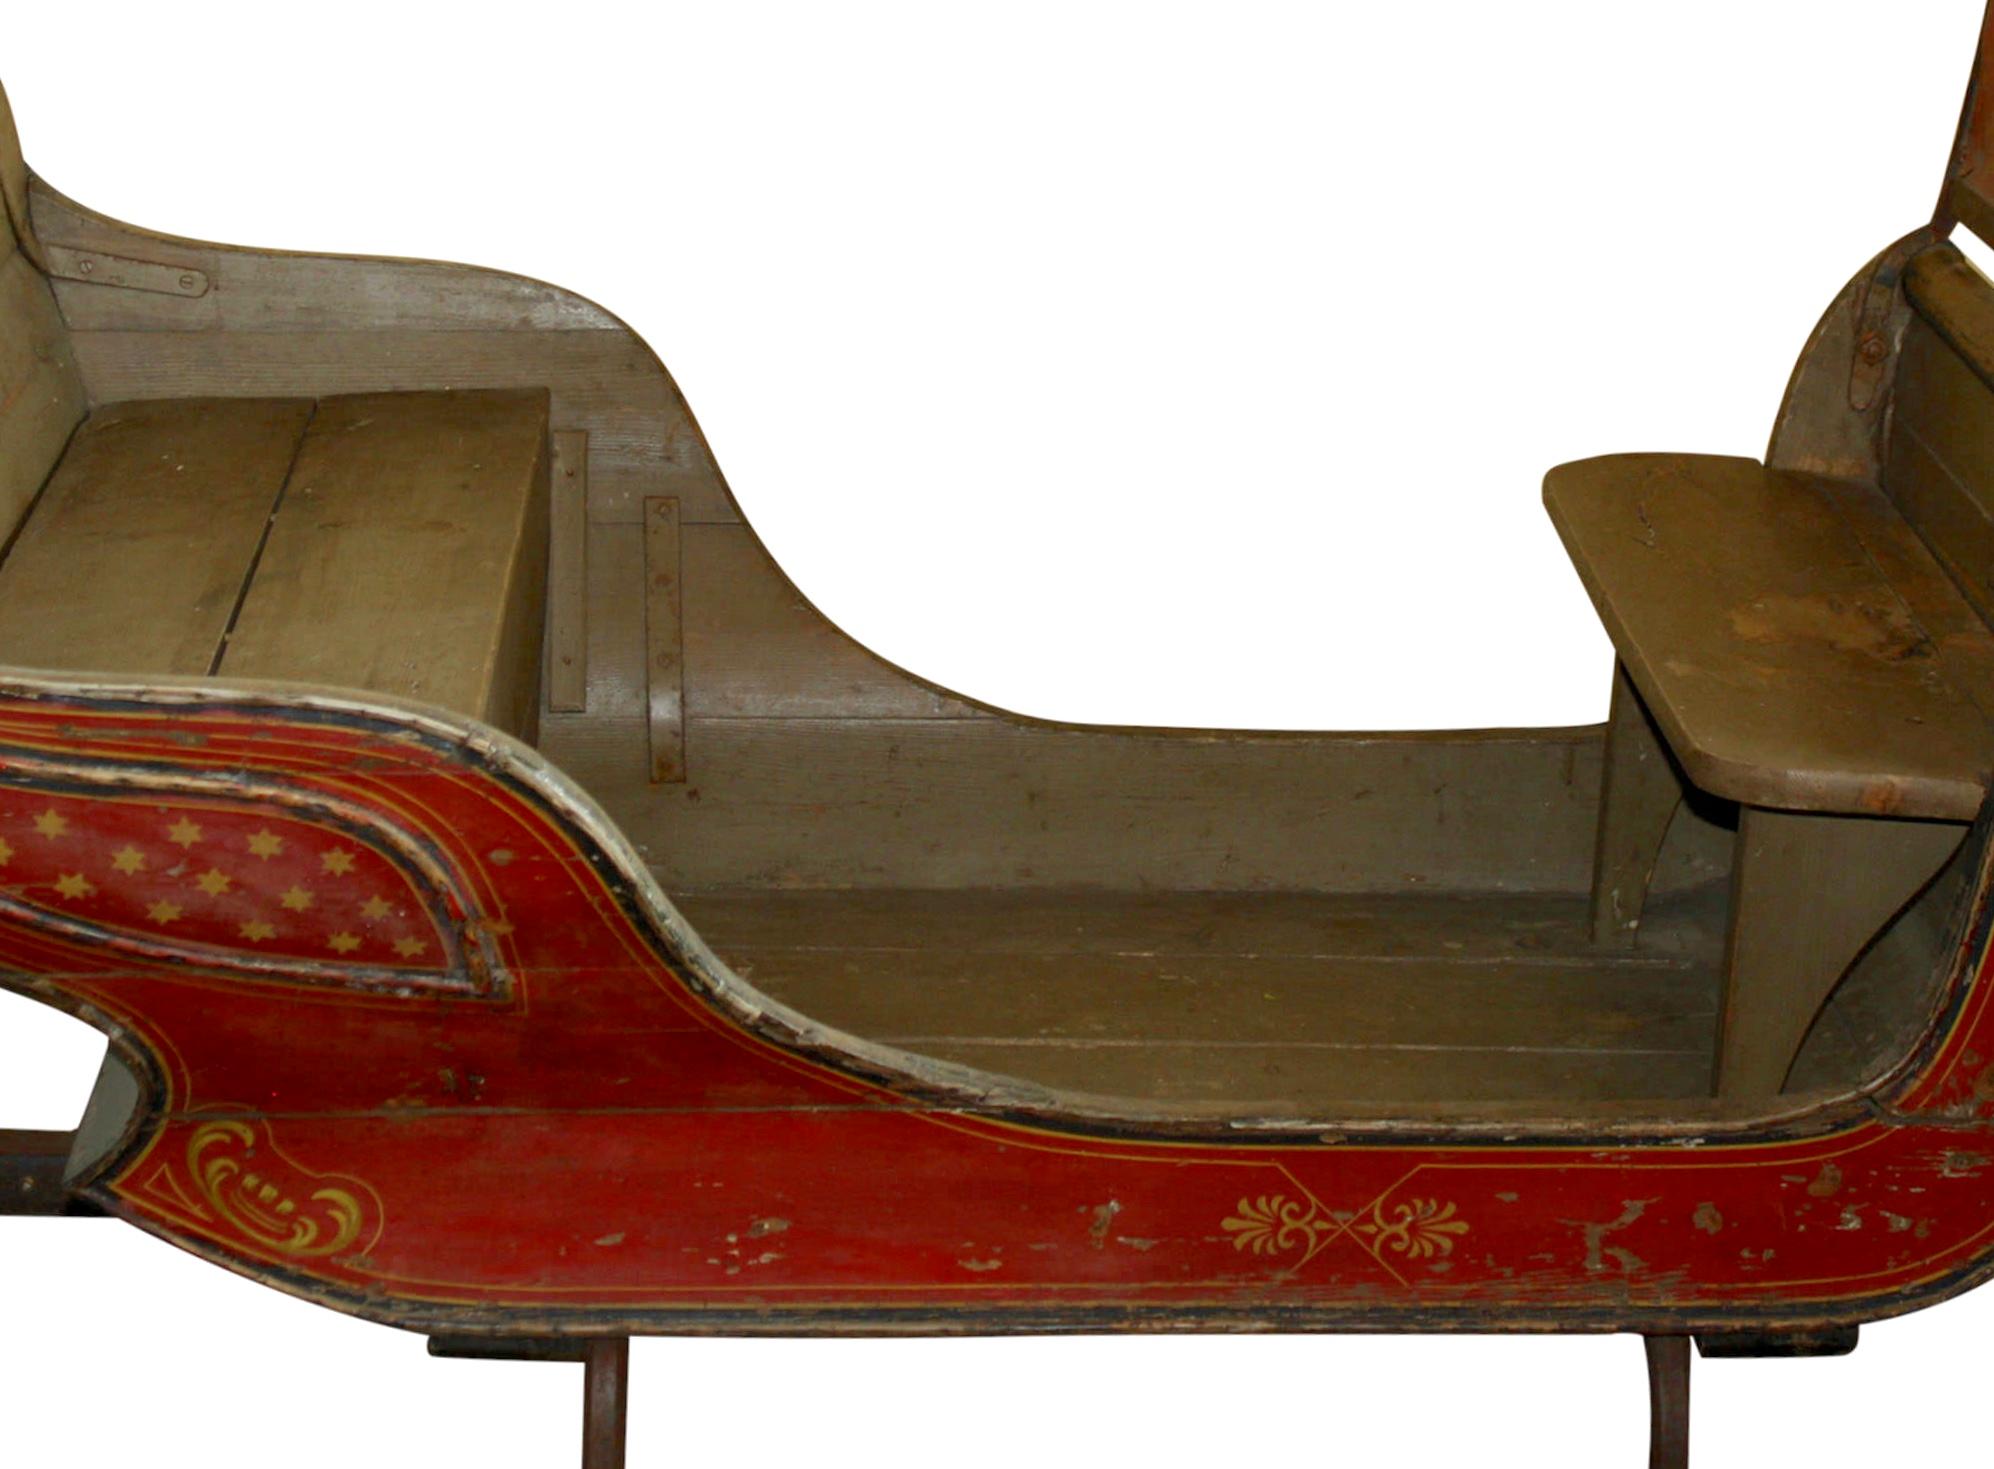 This 19th century, horse-drawn sleigh features traditional, Folk Art painting from Denmark. The wood runners have pinstriped, metal glides and hooks for connecting traces or tugs. Equipped with a front bench, rear bench, and rear saddle seat, the